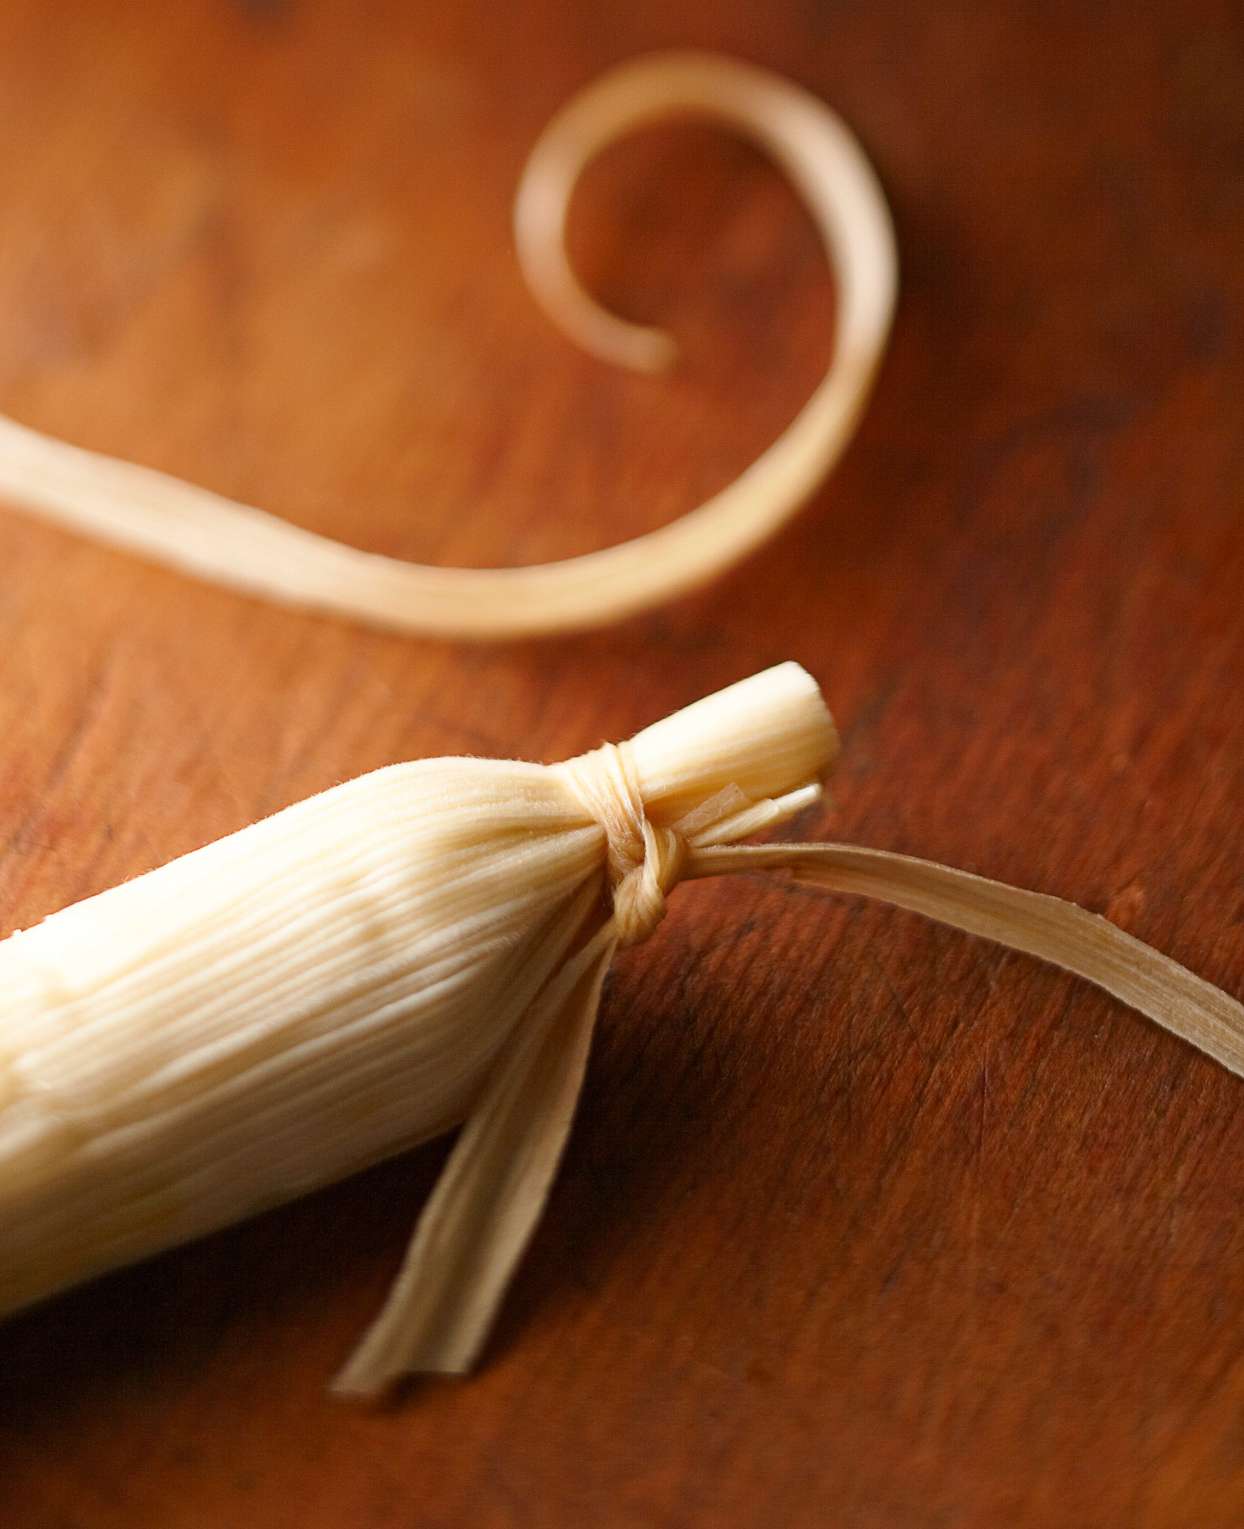 tying the ends of tamales